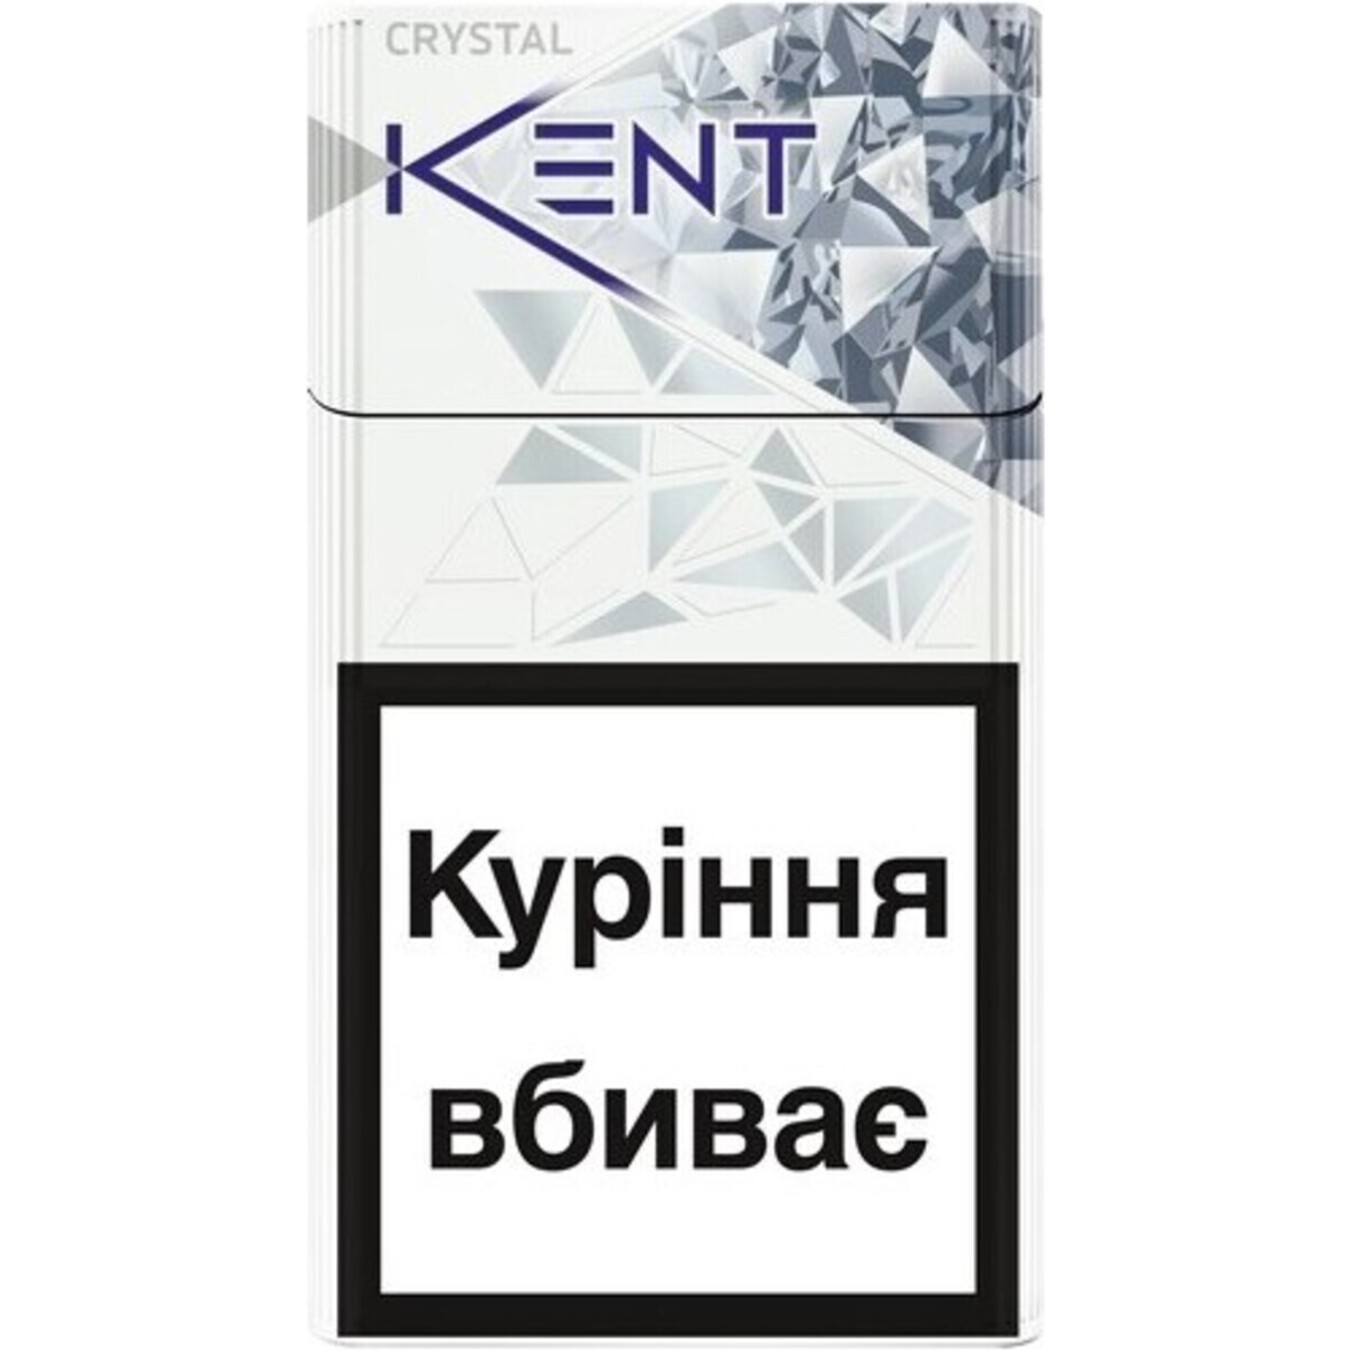 Kent Crystal Silver Cigarettes (the price is indicated without excise tax)